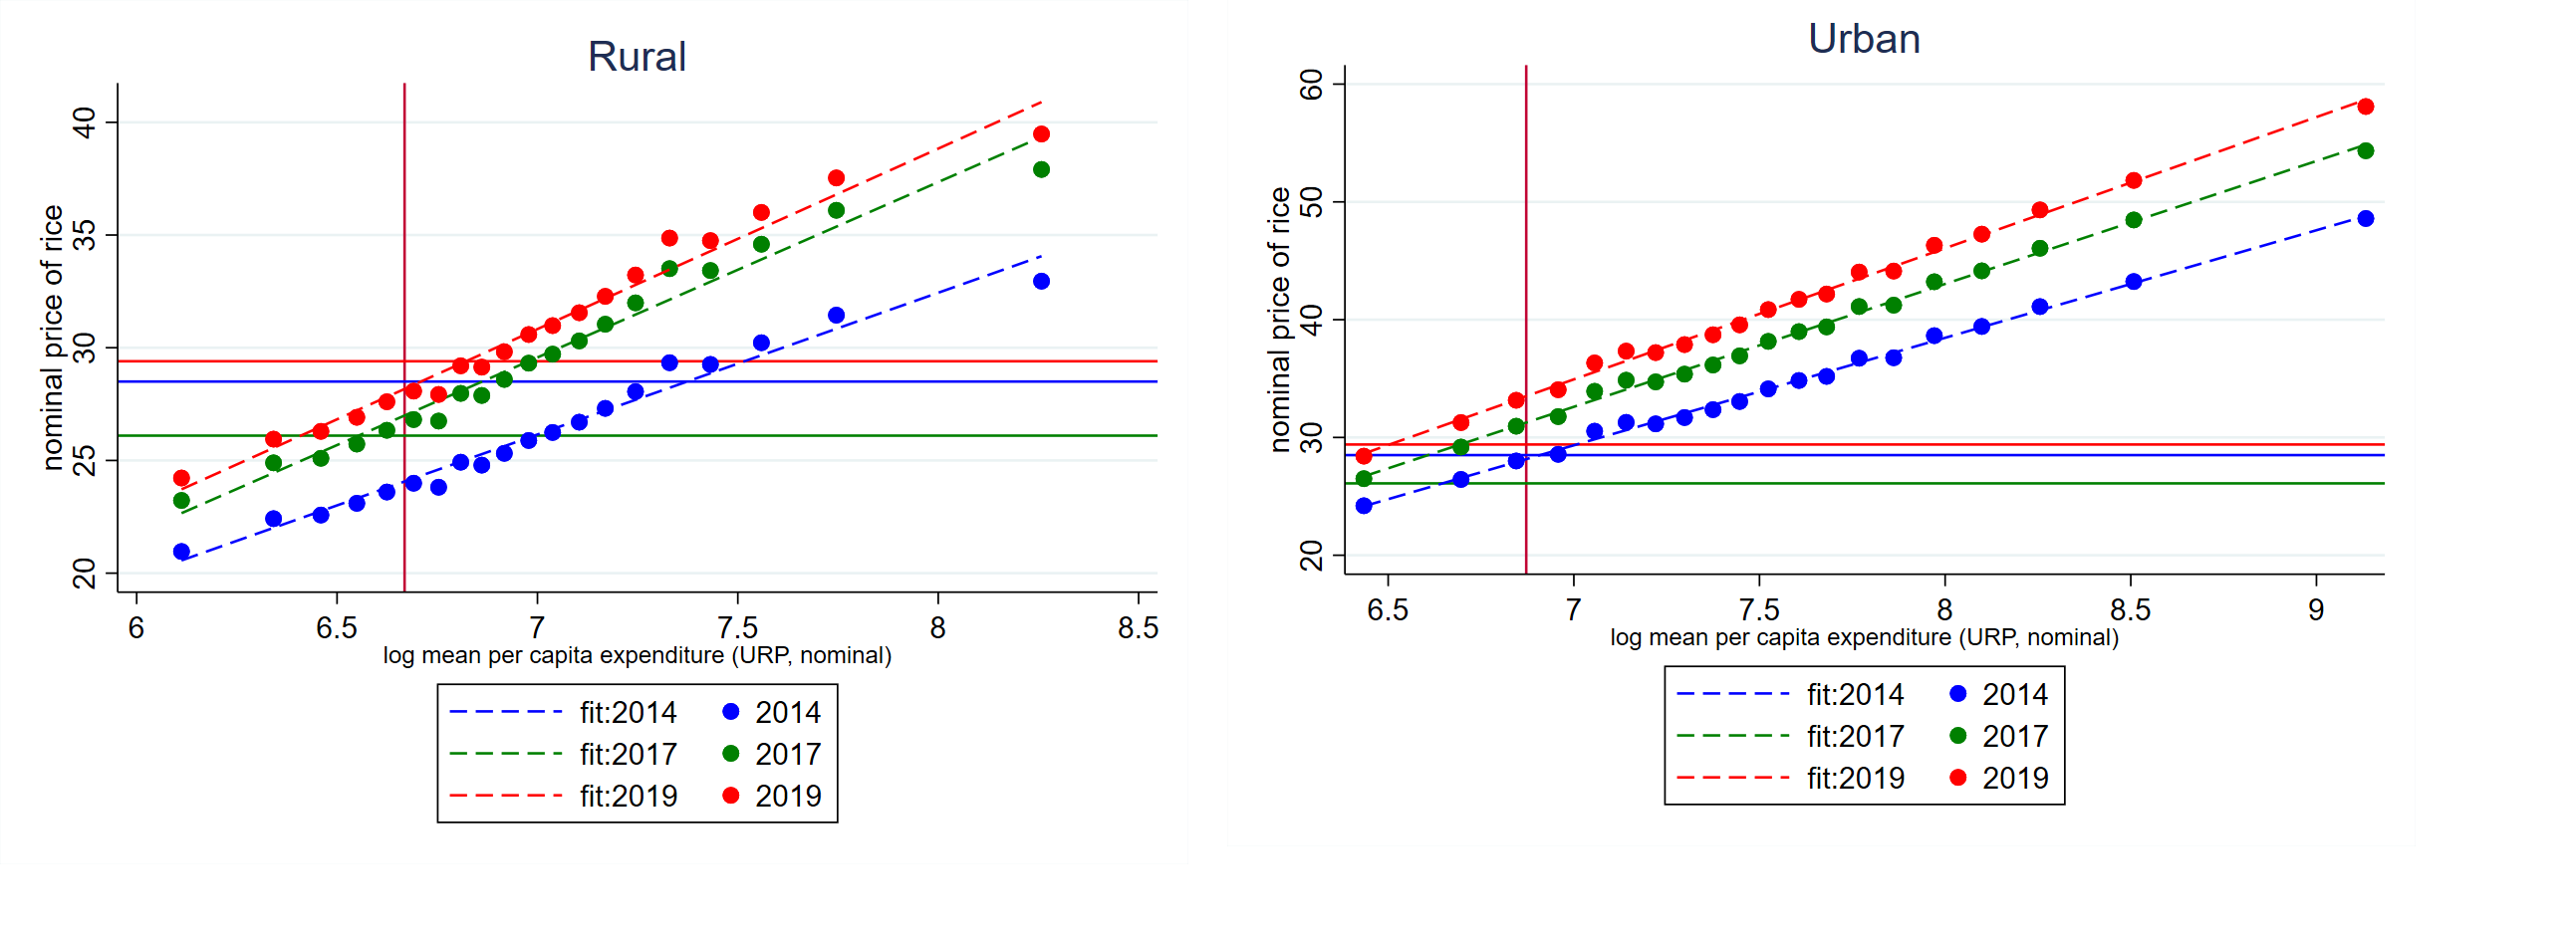 Figure 4: Selection of a uniform market price can impact estimates of poverty due to quality differentials